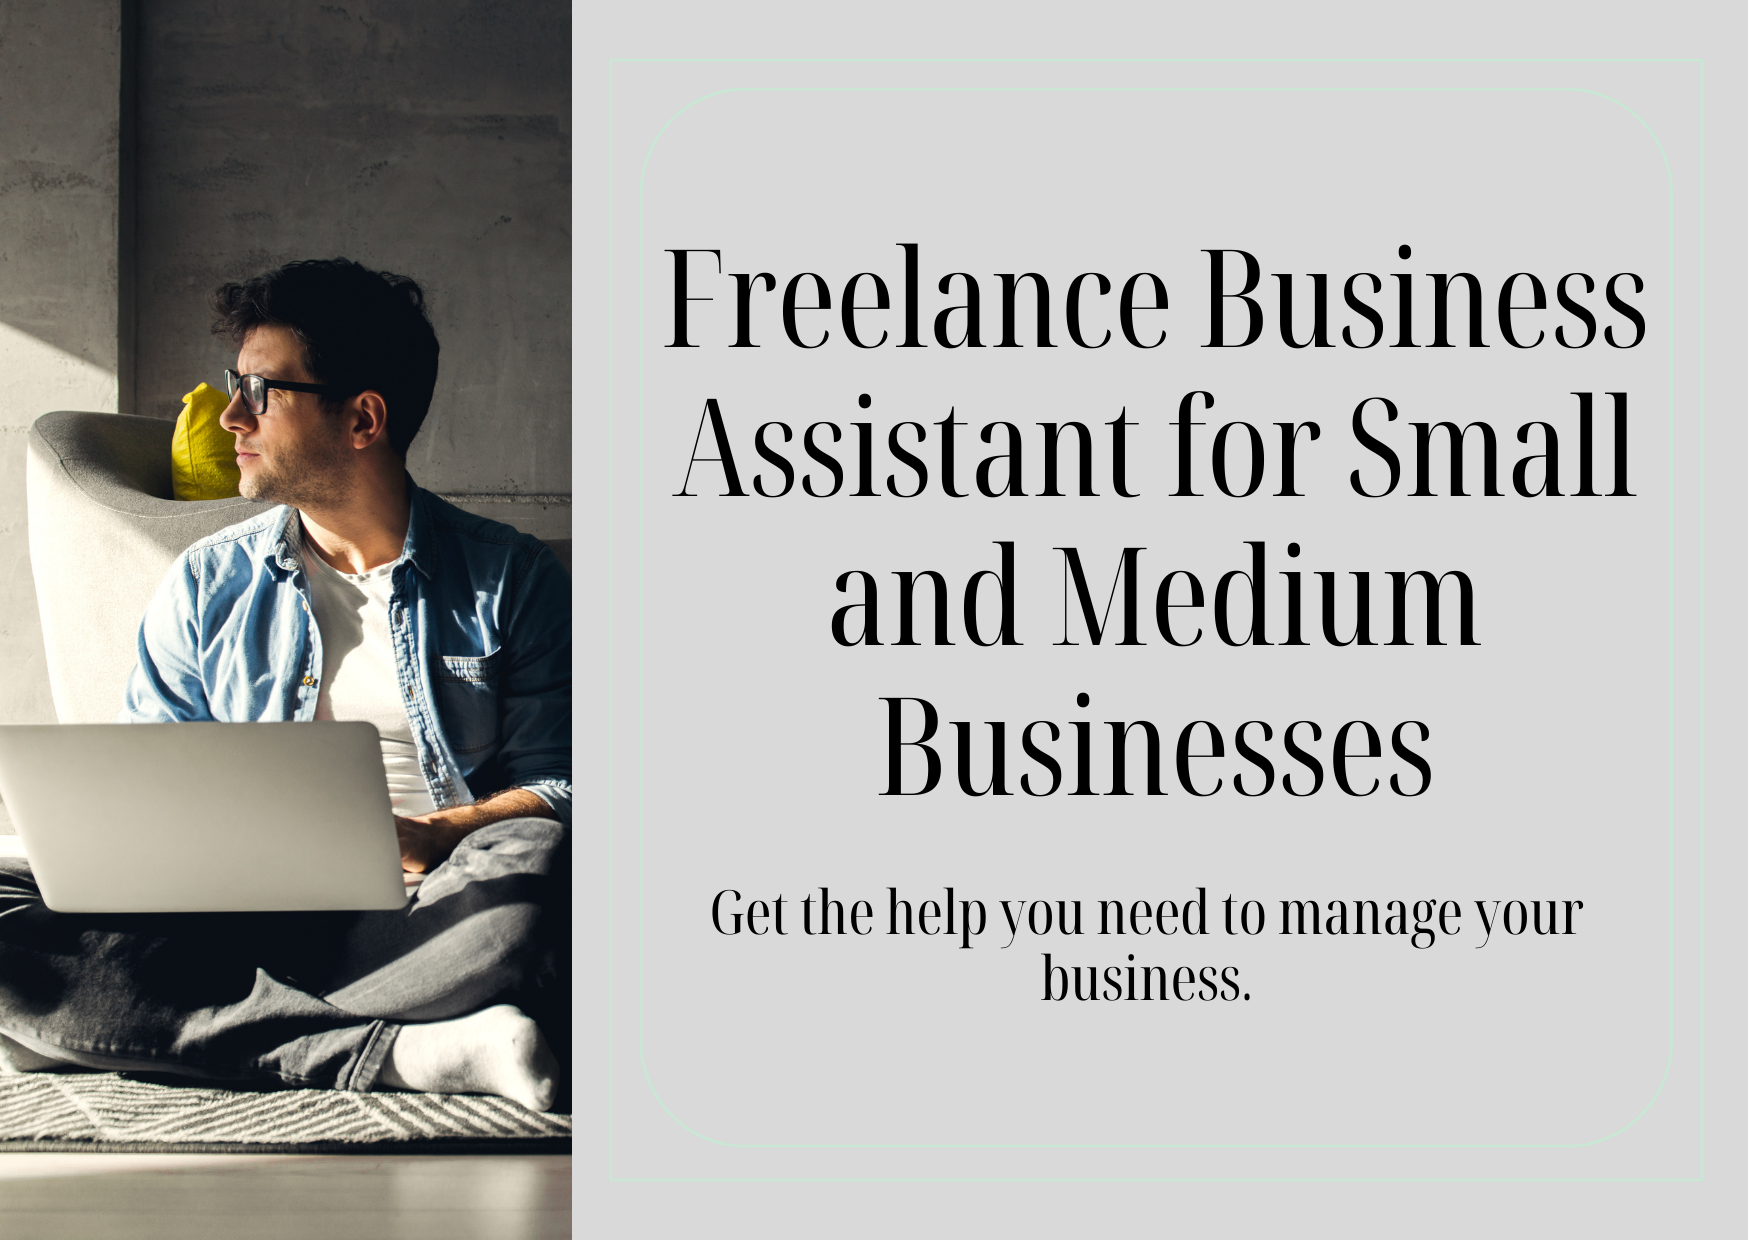 Freelance Business Assistant for Small and Medium Businesses